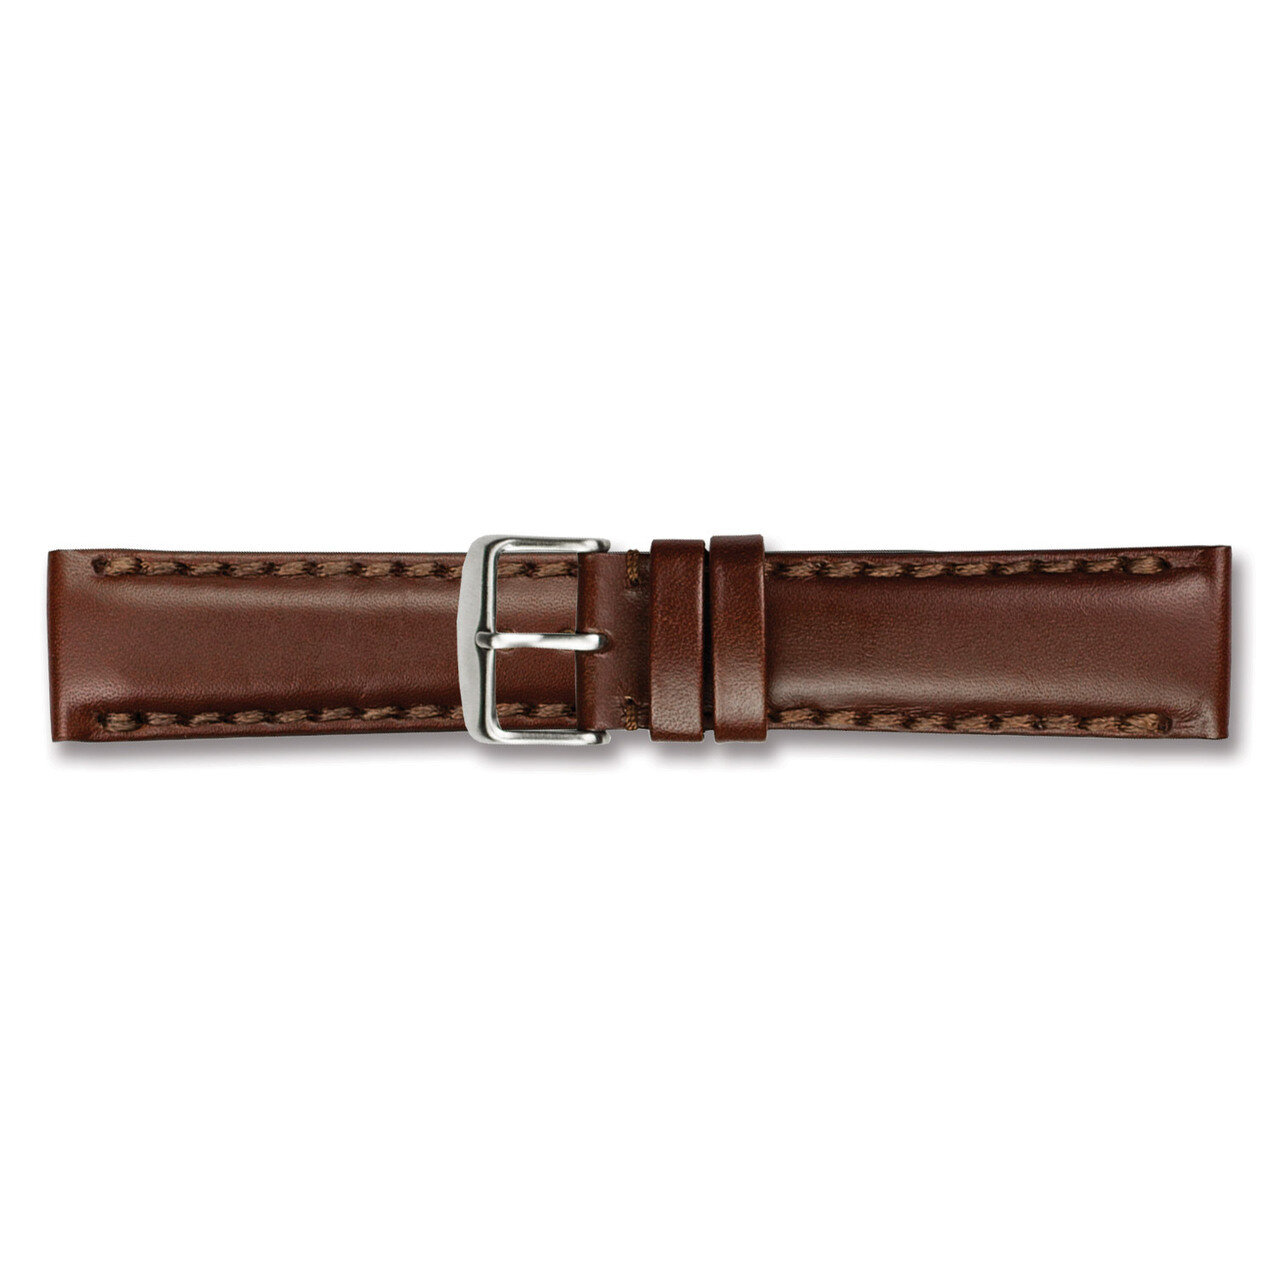 20mm Brown Oil Leather Watch Band 7.5 Inch Silver-tone Buckle BAW322-20